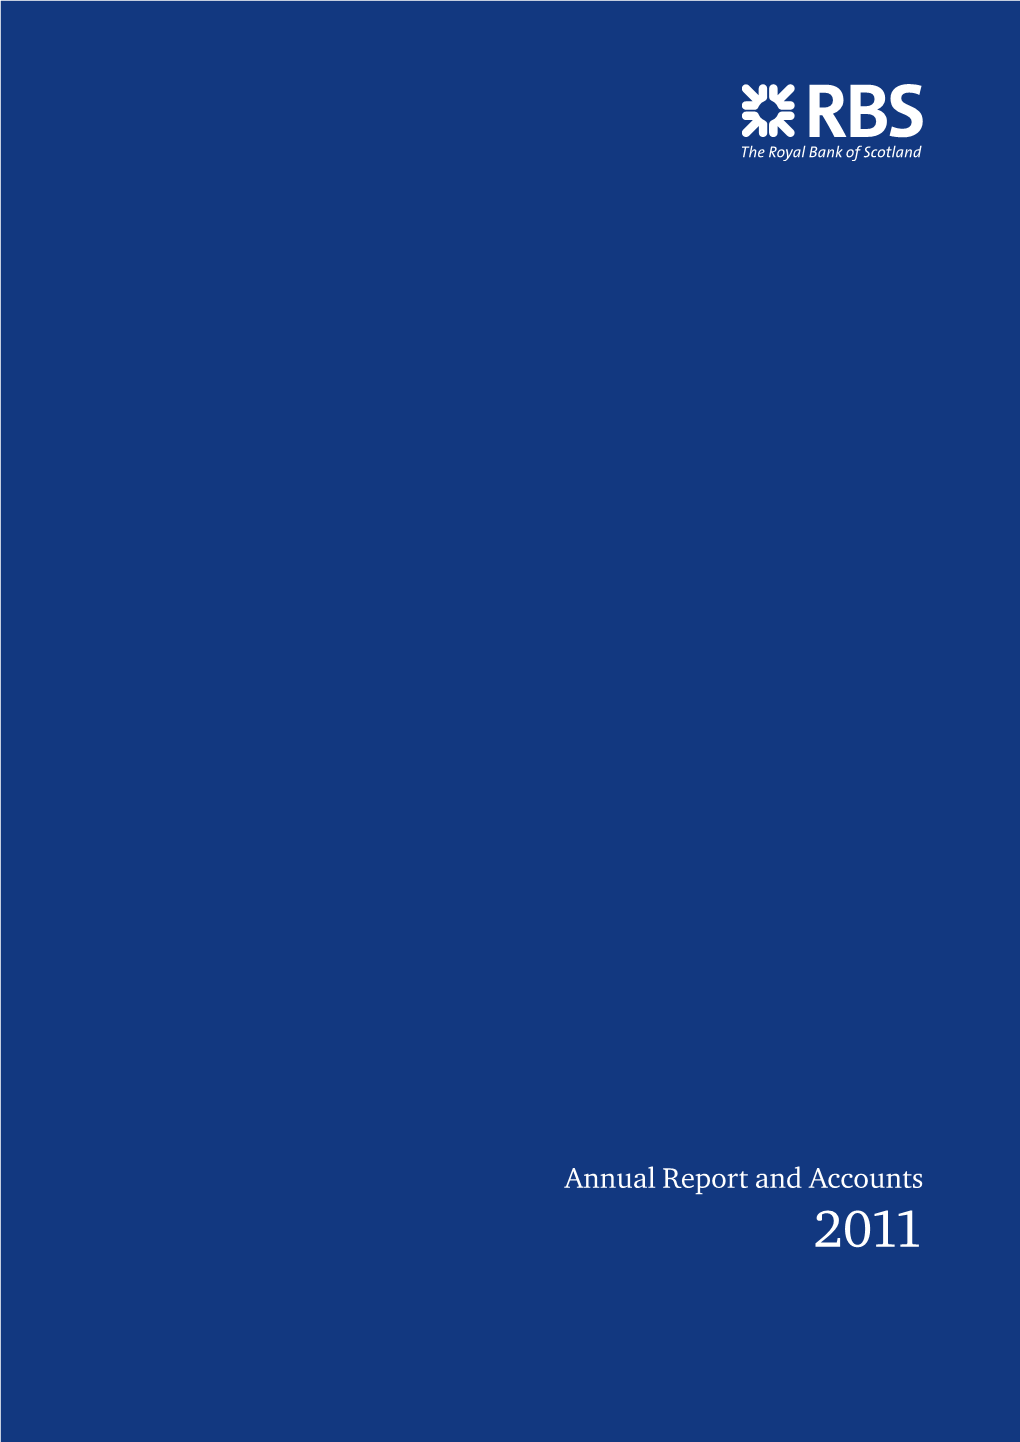 Annual Report and Accounts 2011